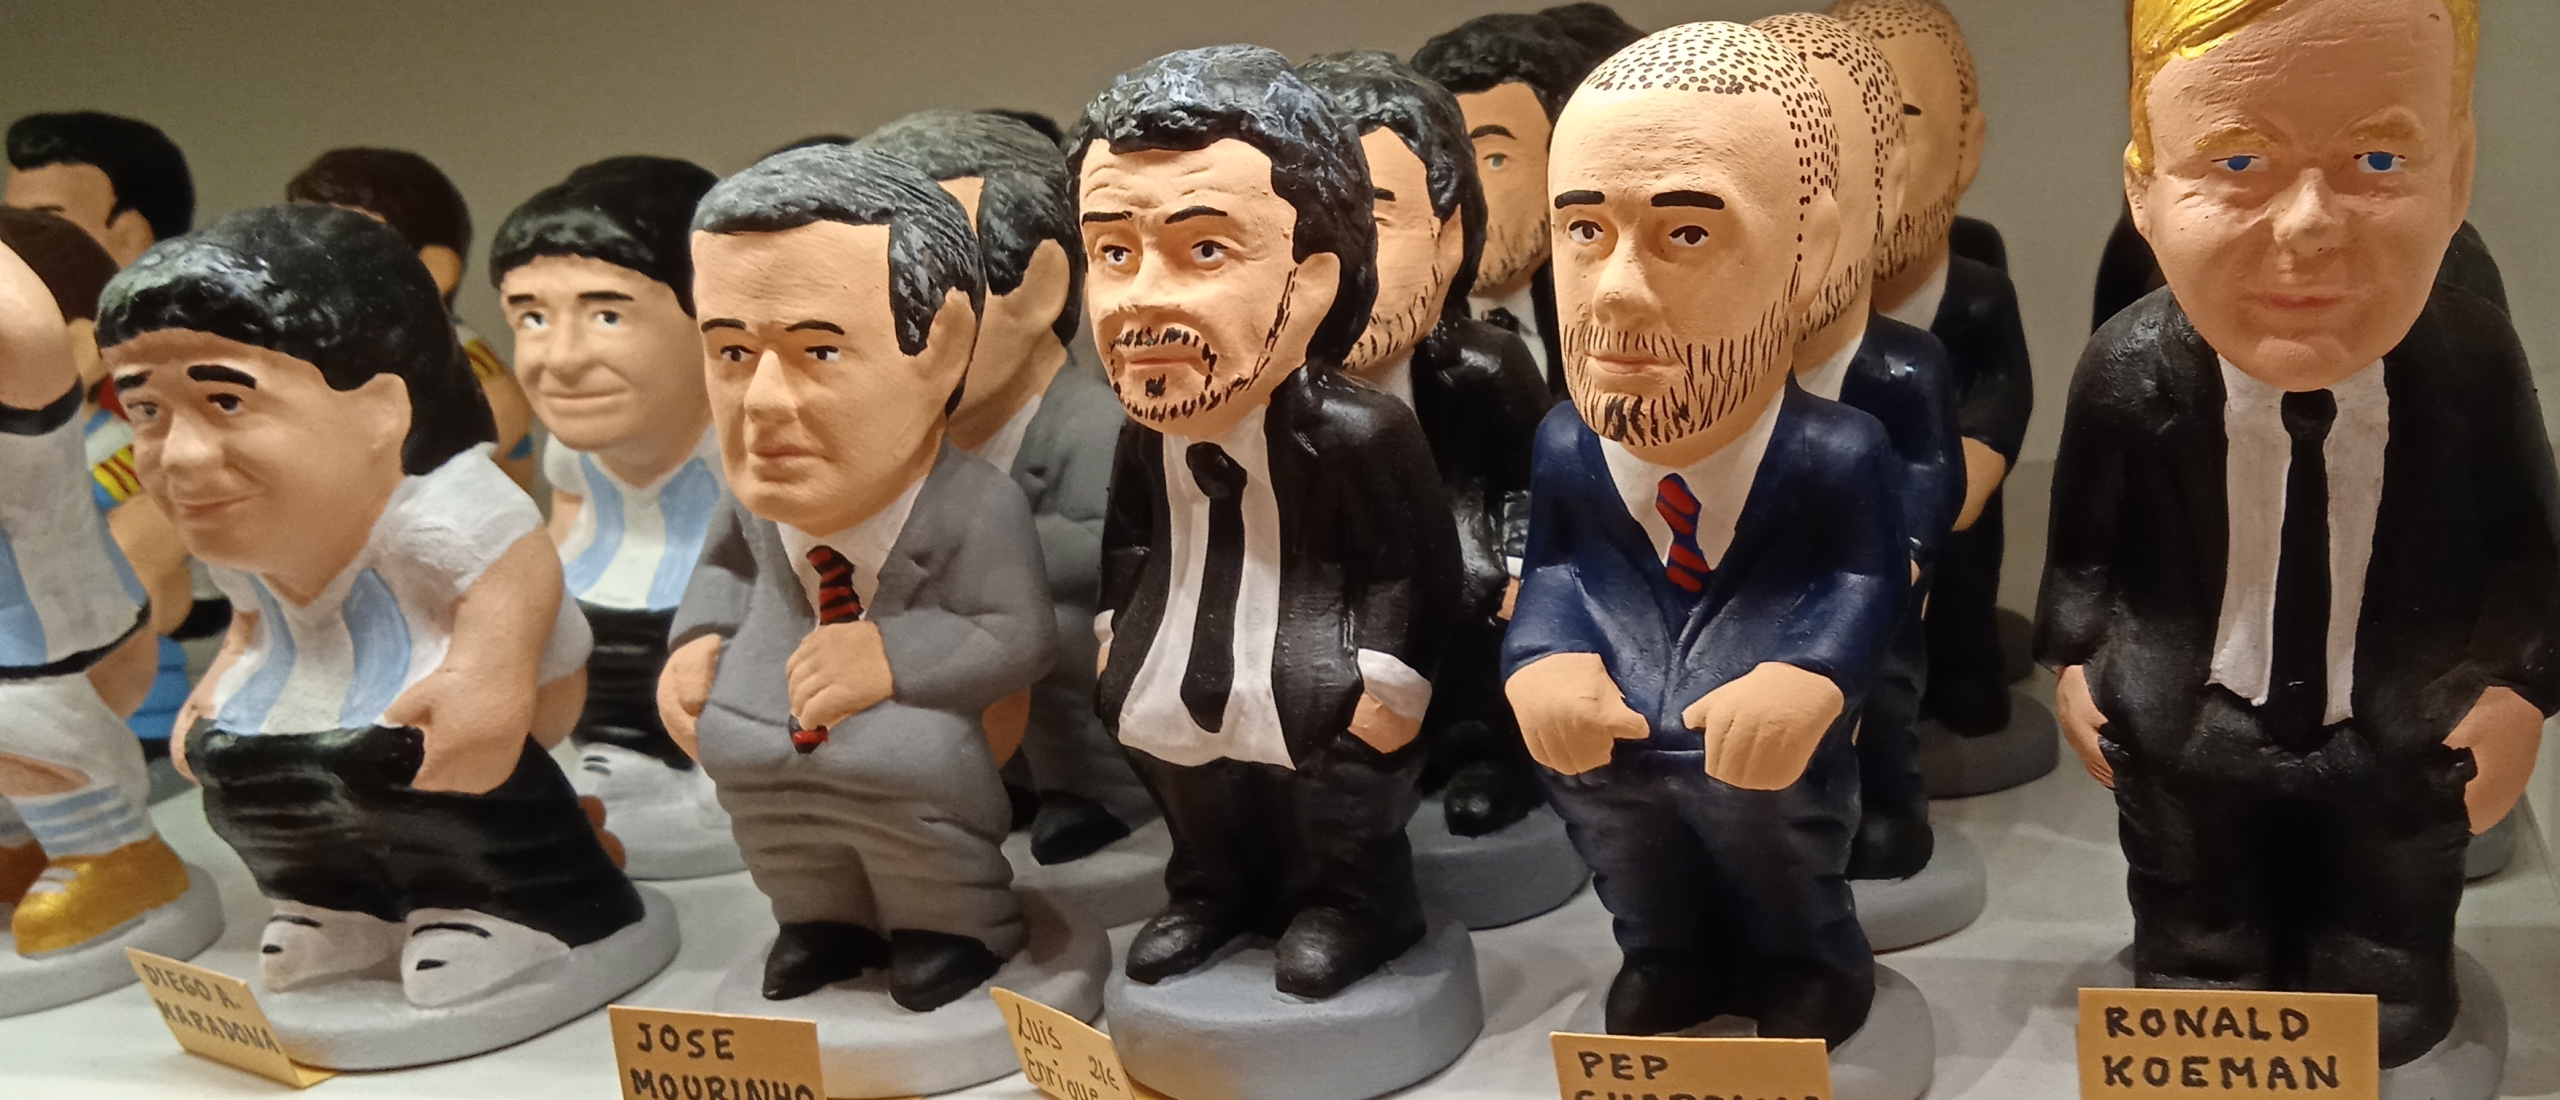 Caganers, a special souvenir from Catalunya